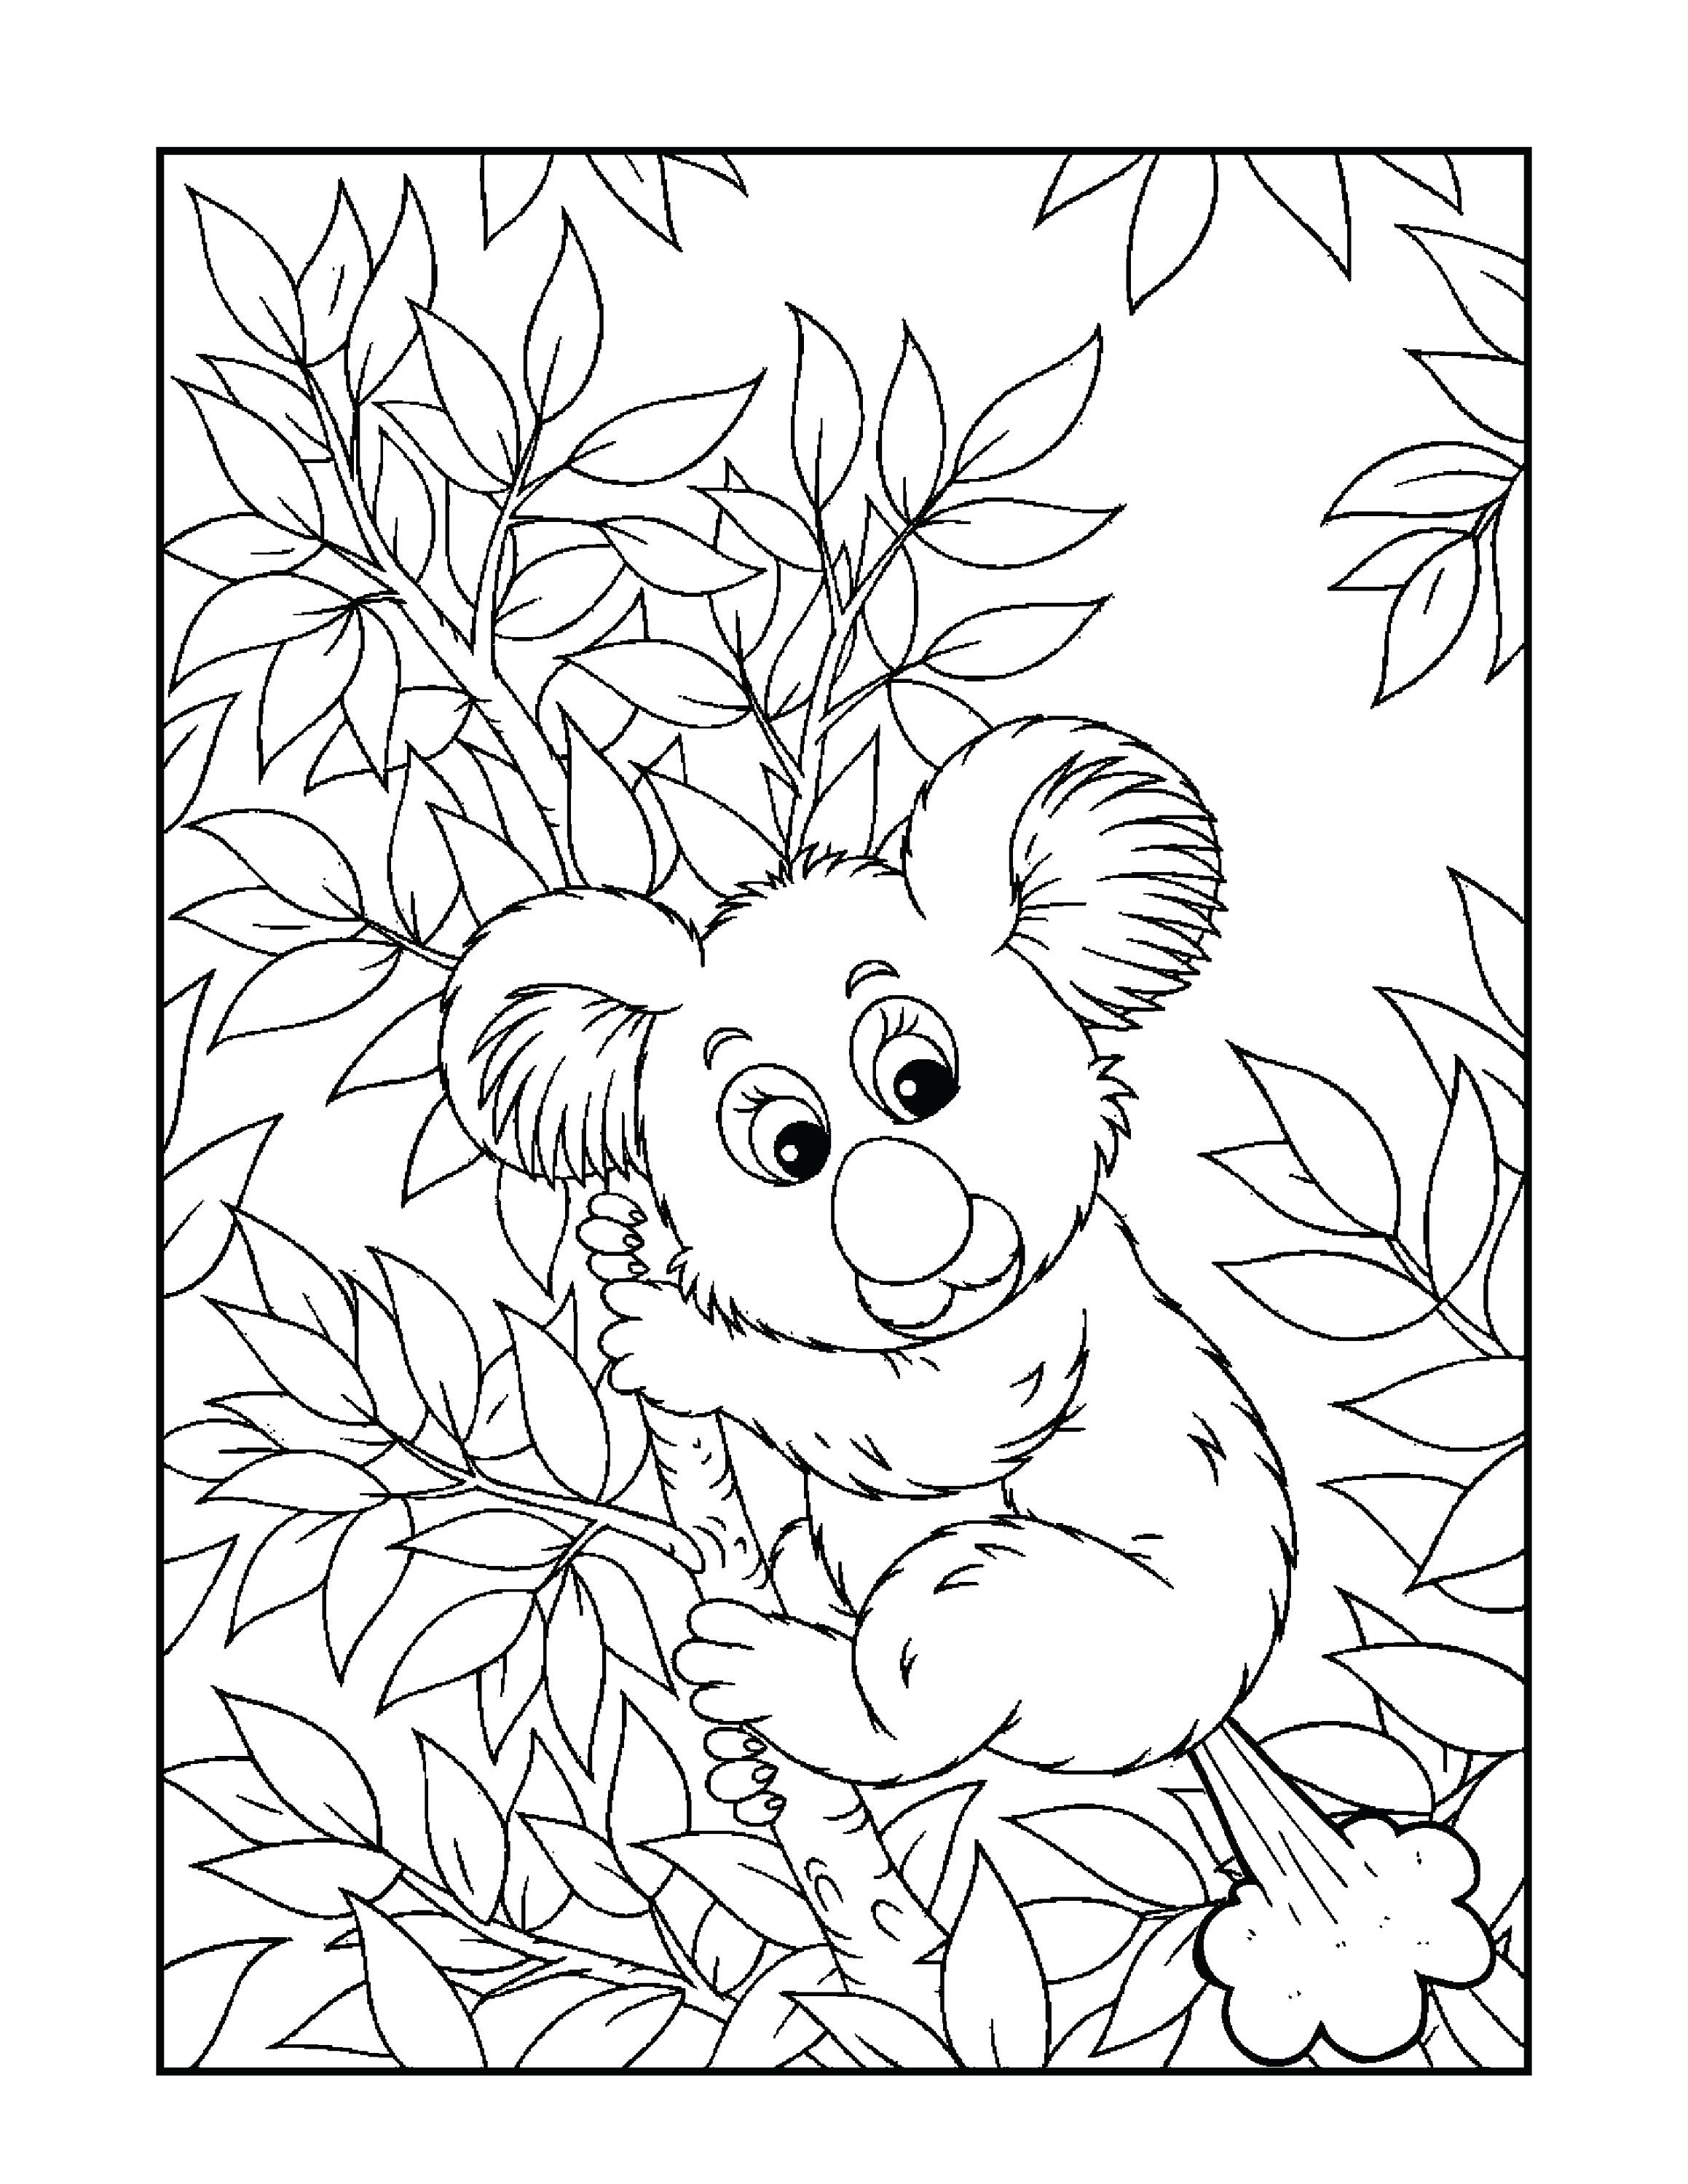 Libro Farting Animal Coloring Book: The Really Best Relaxing